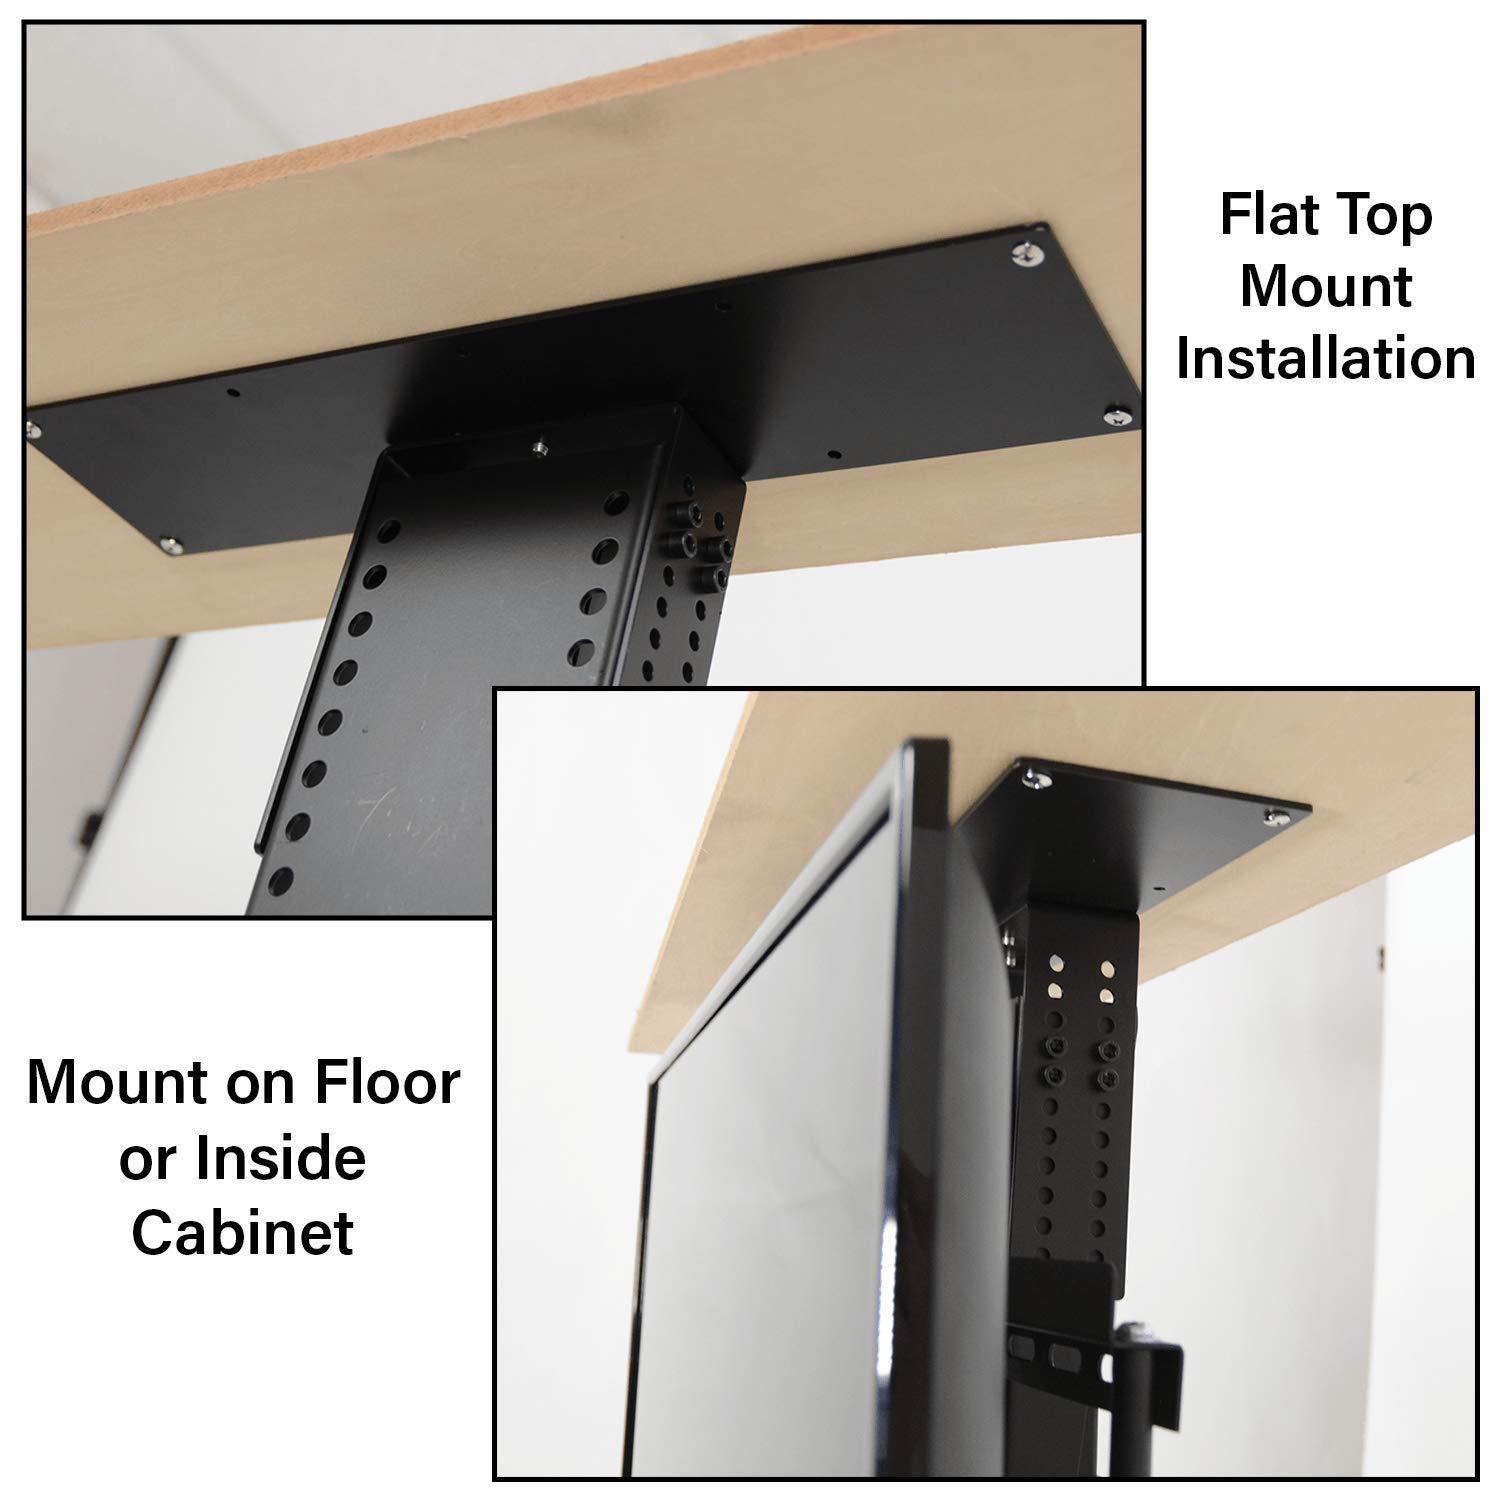 SRV 33900 Pro TV Lift Mechanism  - Touchstone Home Products, Inc installation.